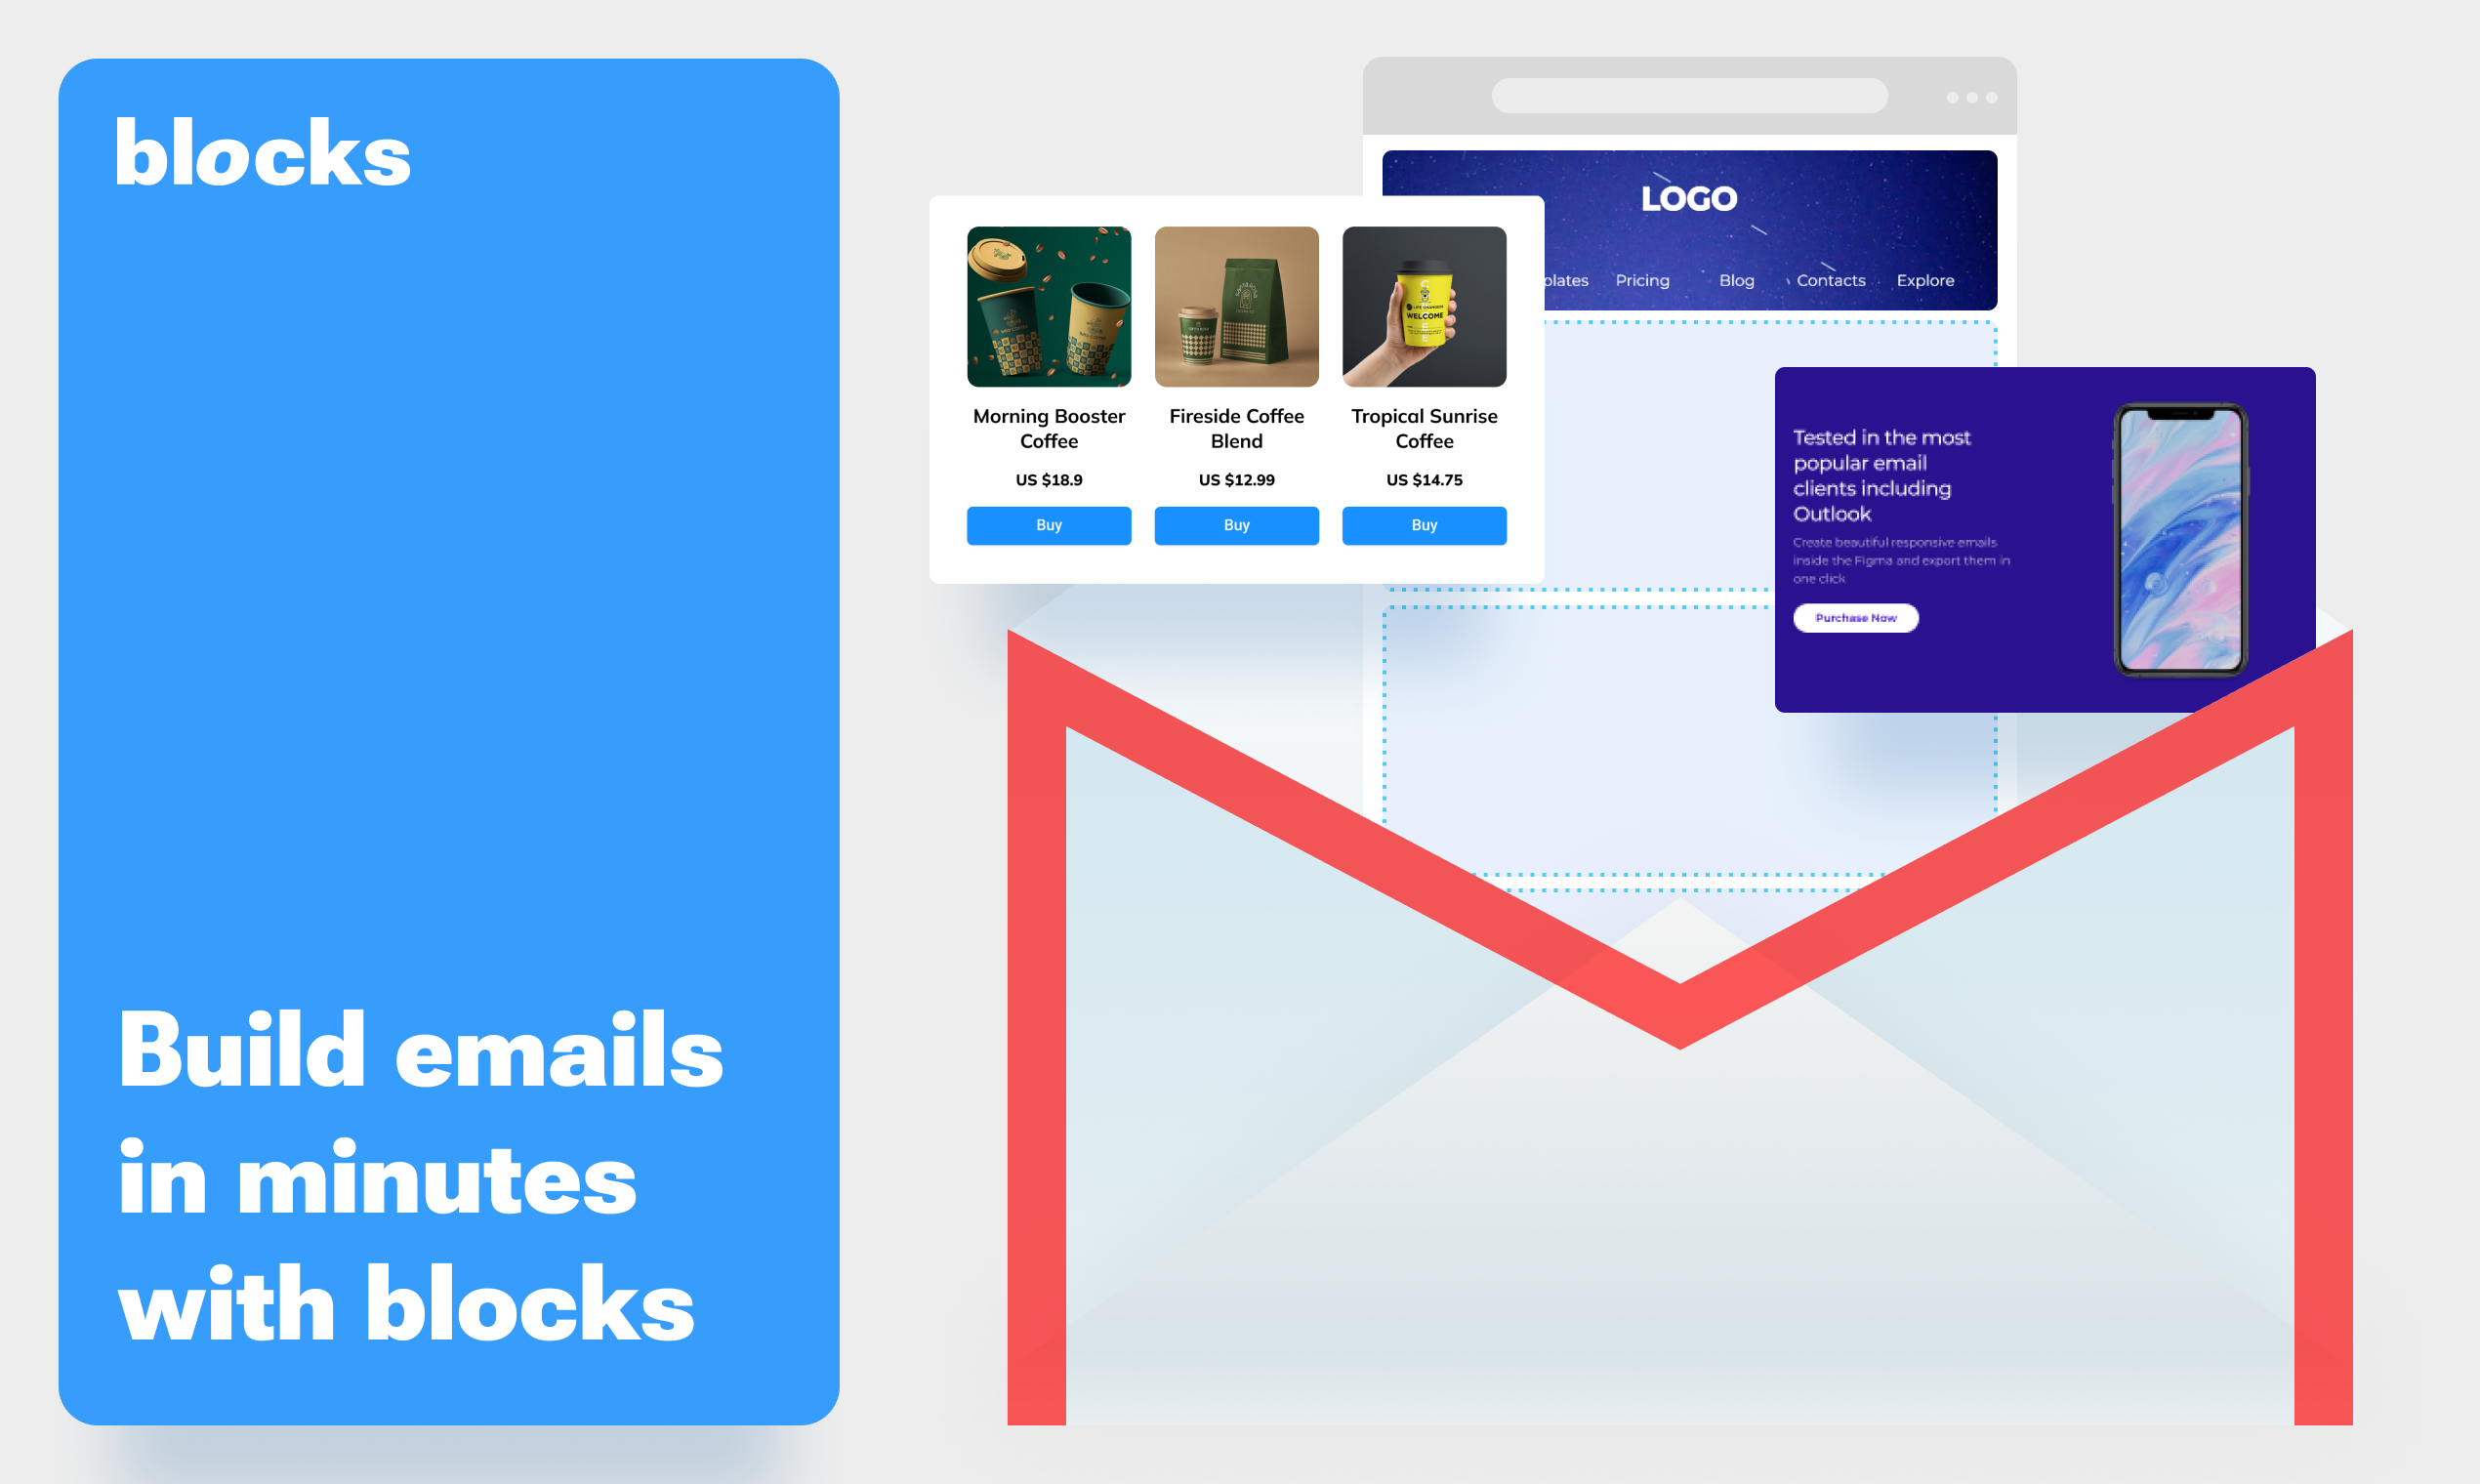 Speed up your email production several times!